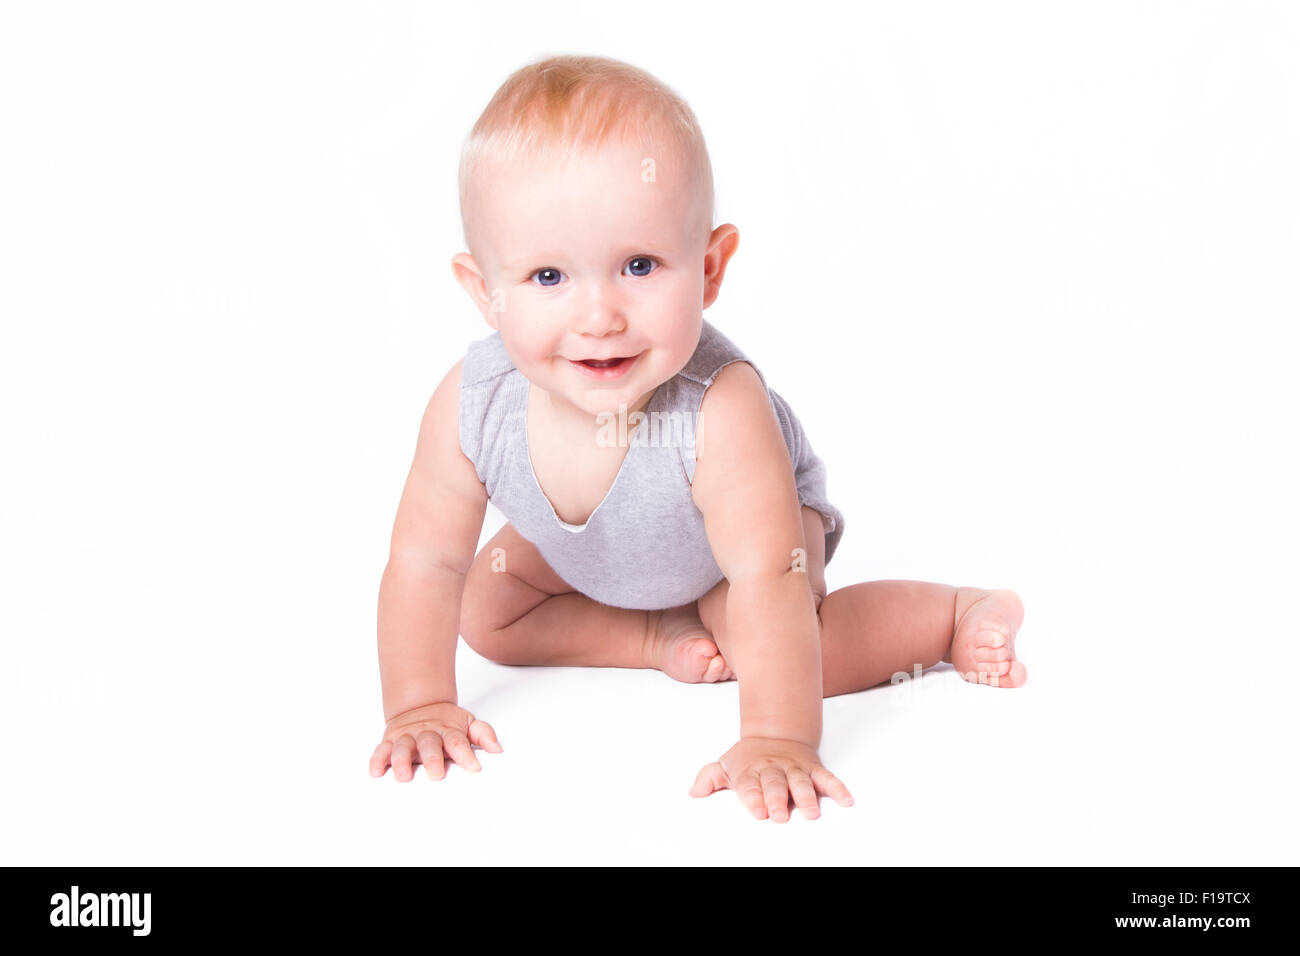 Studio shot of baby boy playing on the floor looking at the camera. Stock Photo